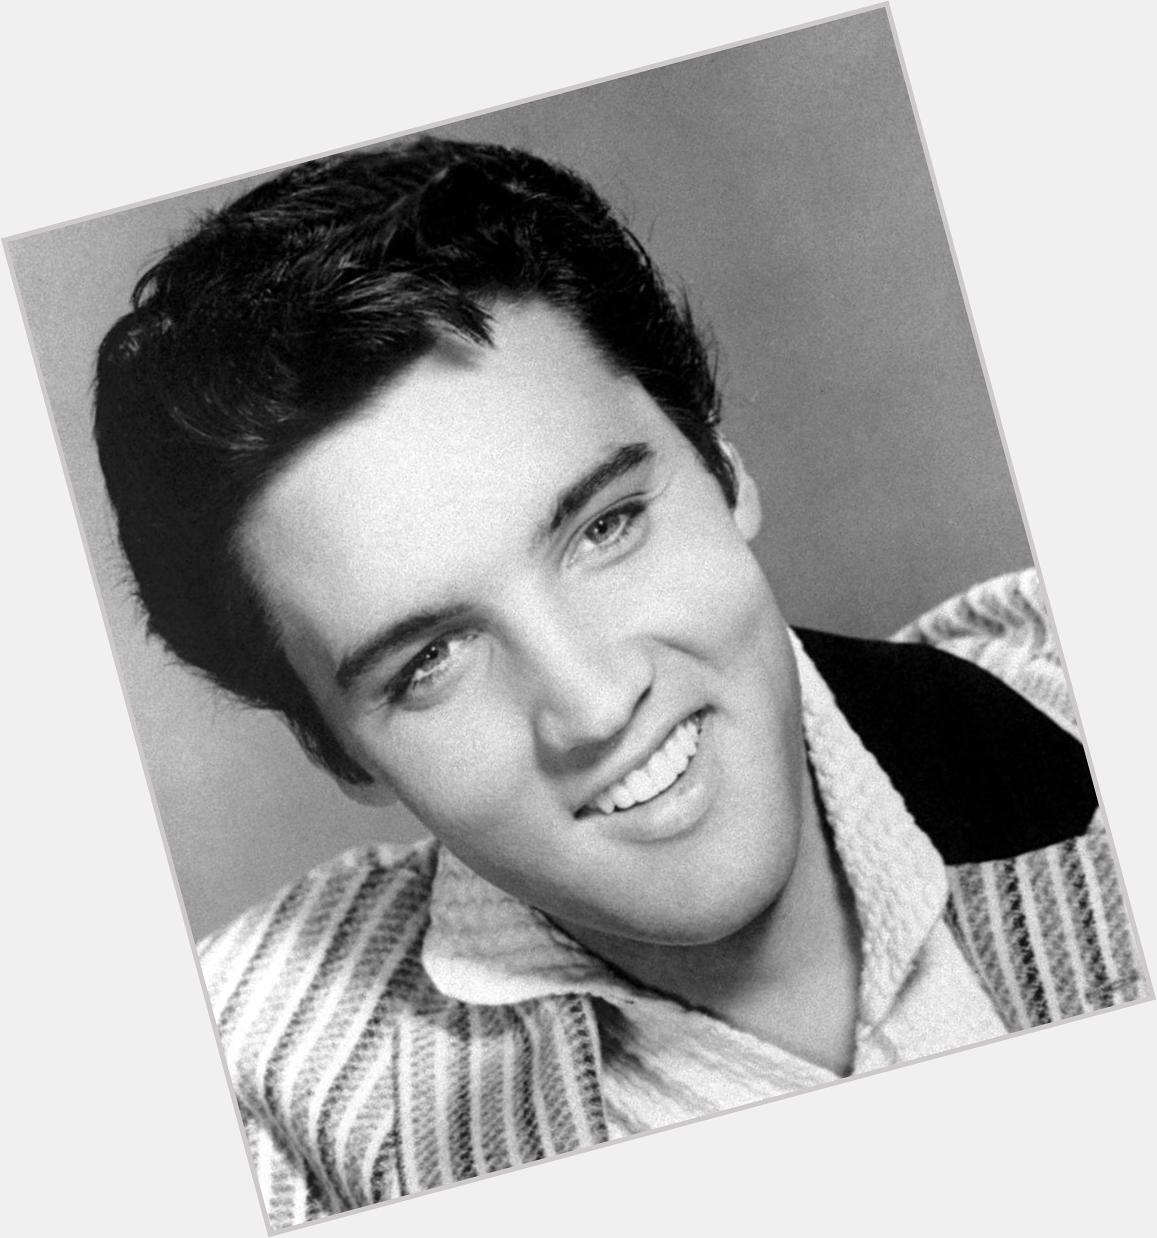 Happy birthday to the King!!! Such an important musician, rest in peace Elvis Presley!! 